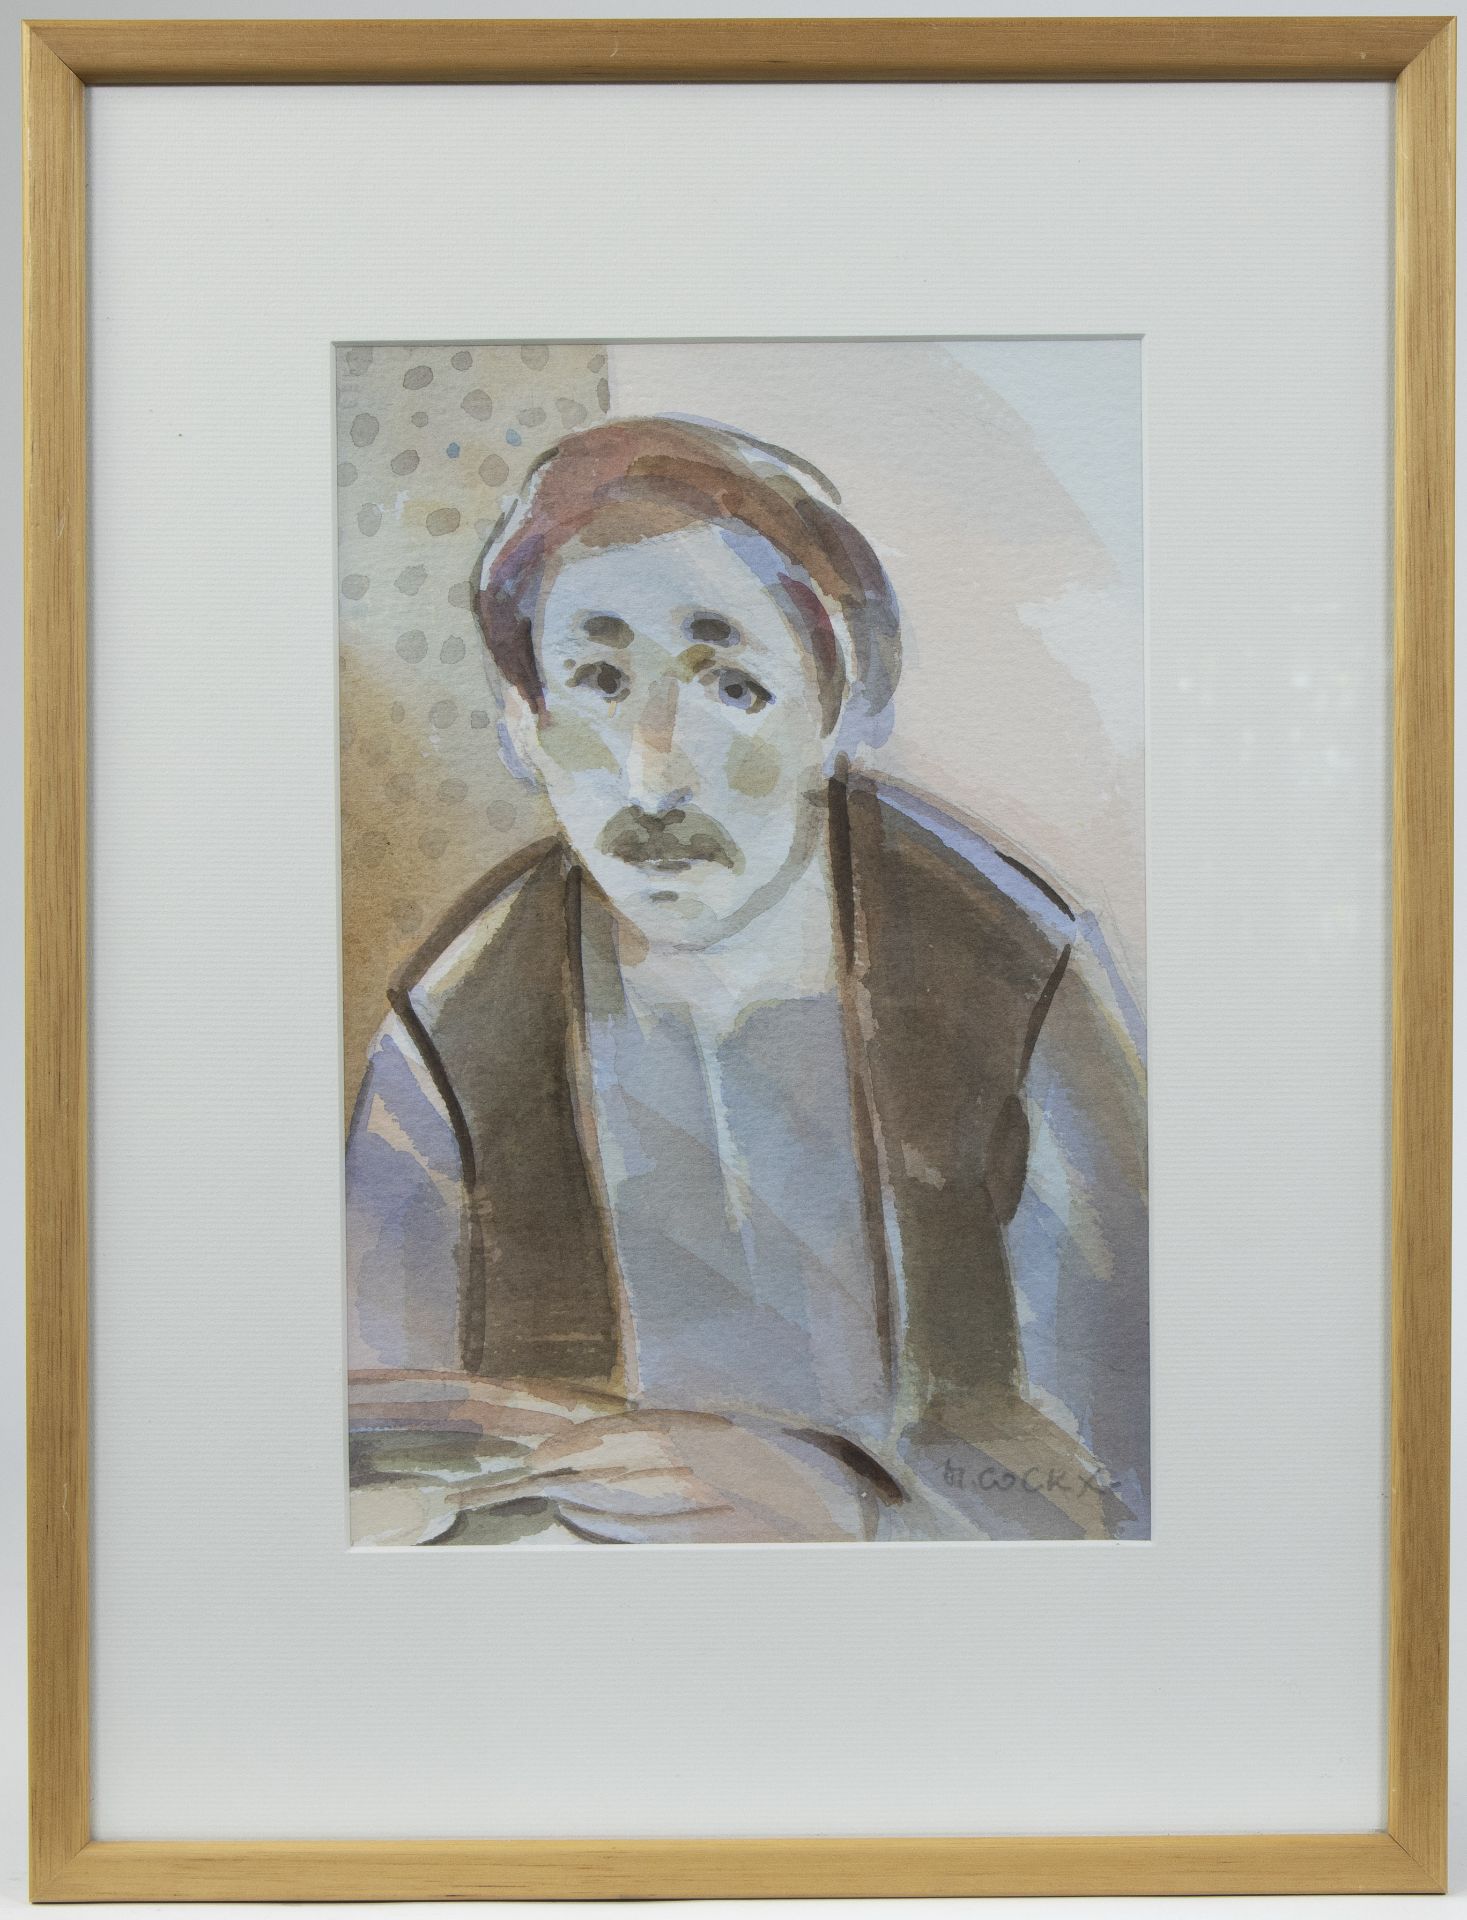 Marcel COCKX (1930-2007), 2 watercolour paintings, signed - Image 4 of 7